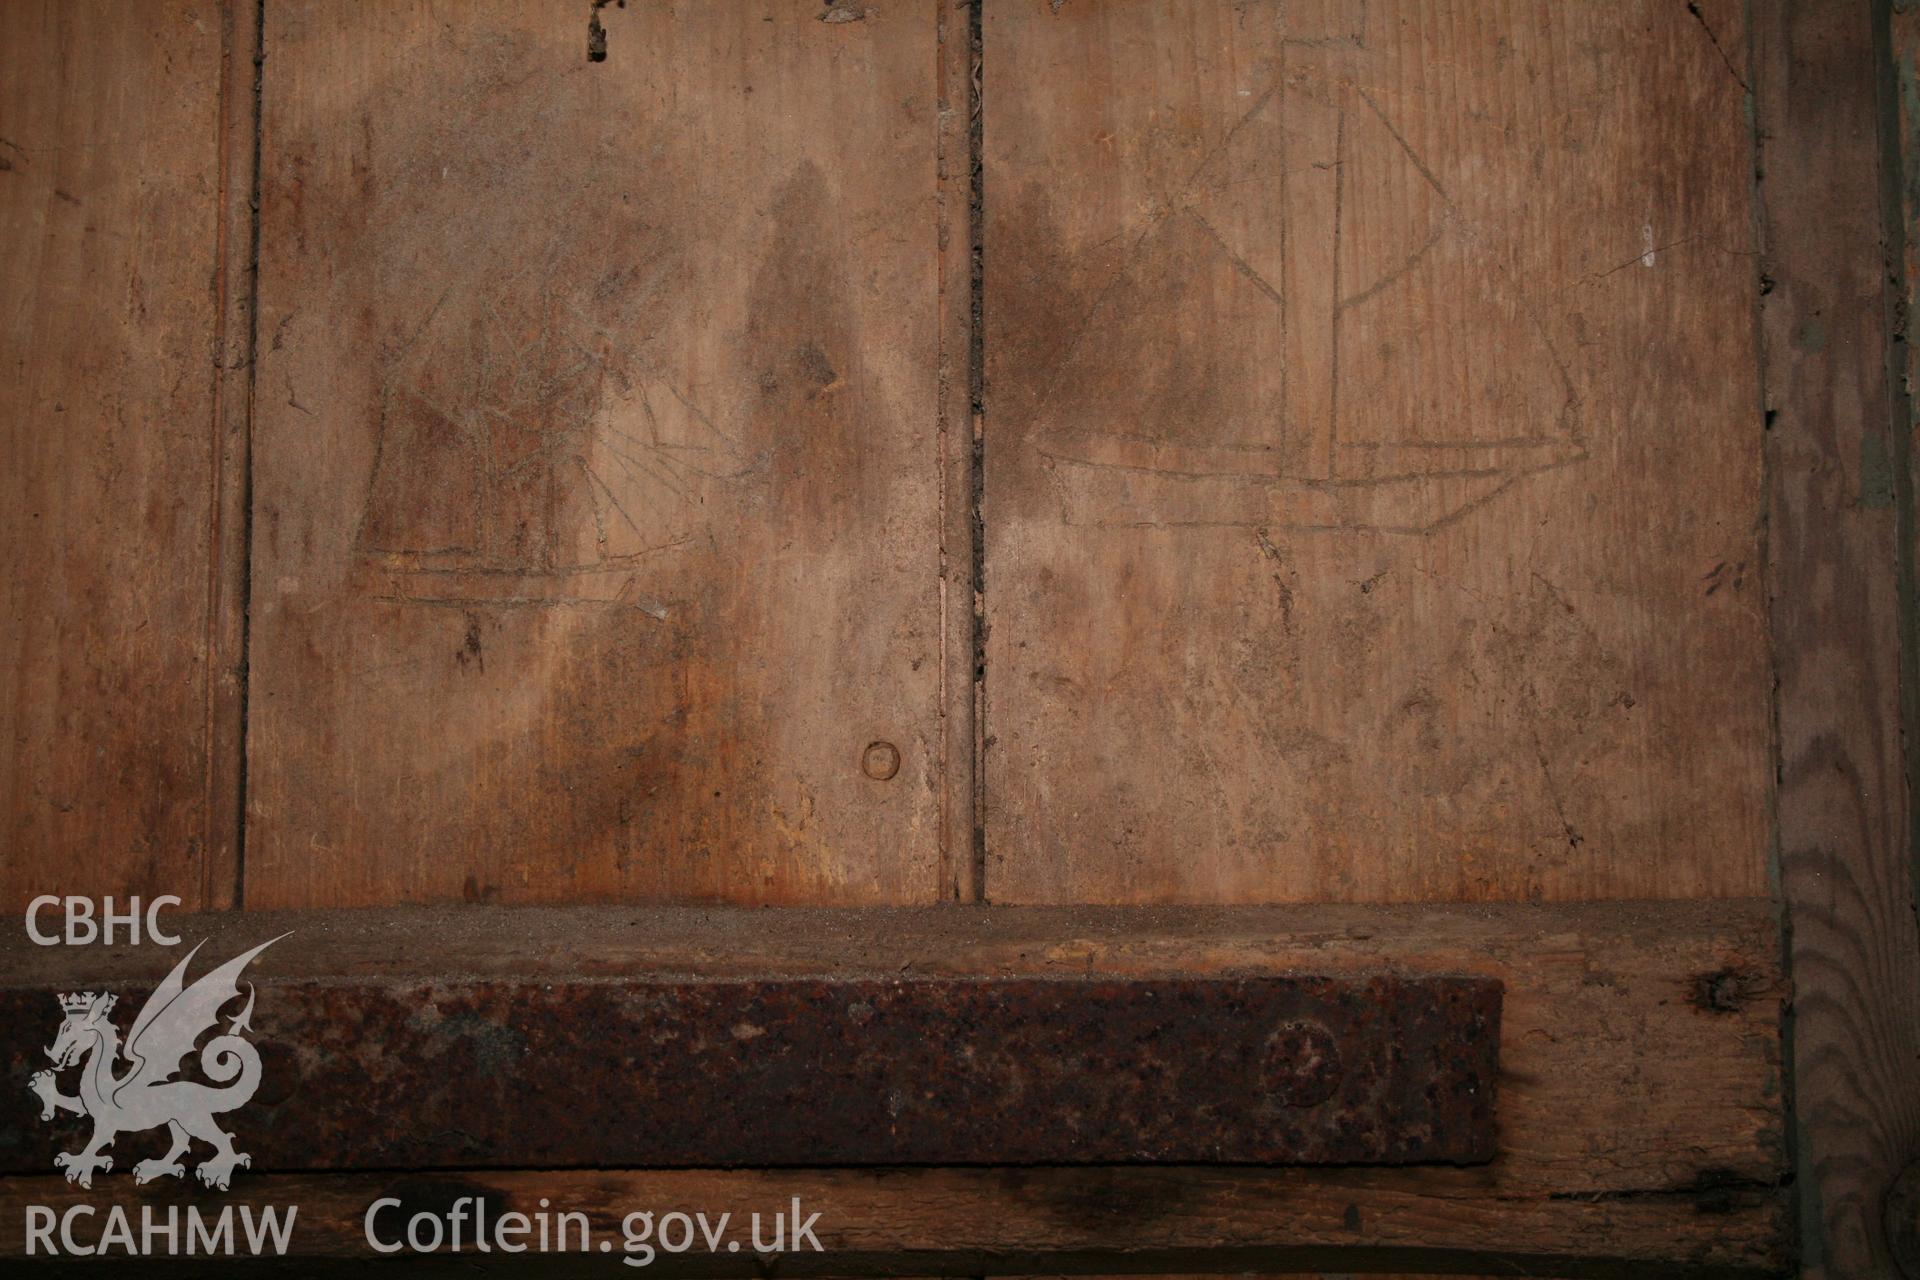 Interior view of wooden door with boat 'graffiti'. Photographic survey of the threshing house, straw house, mixing house and root house at Tan-y-Graig Farm, Llanfarian, conducted by Geoff Ward and John Wiles, 11th December 2006.